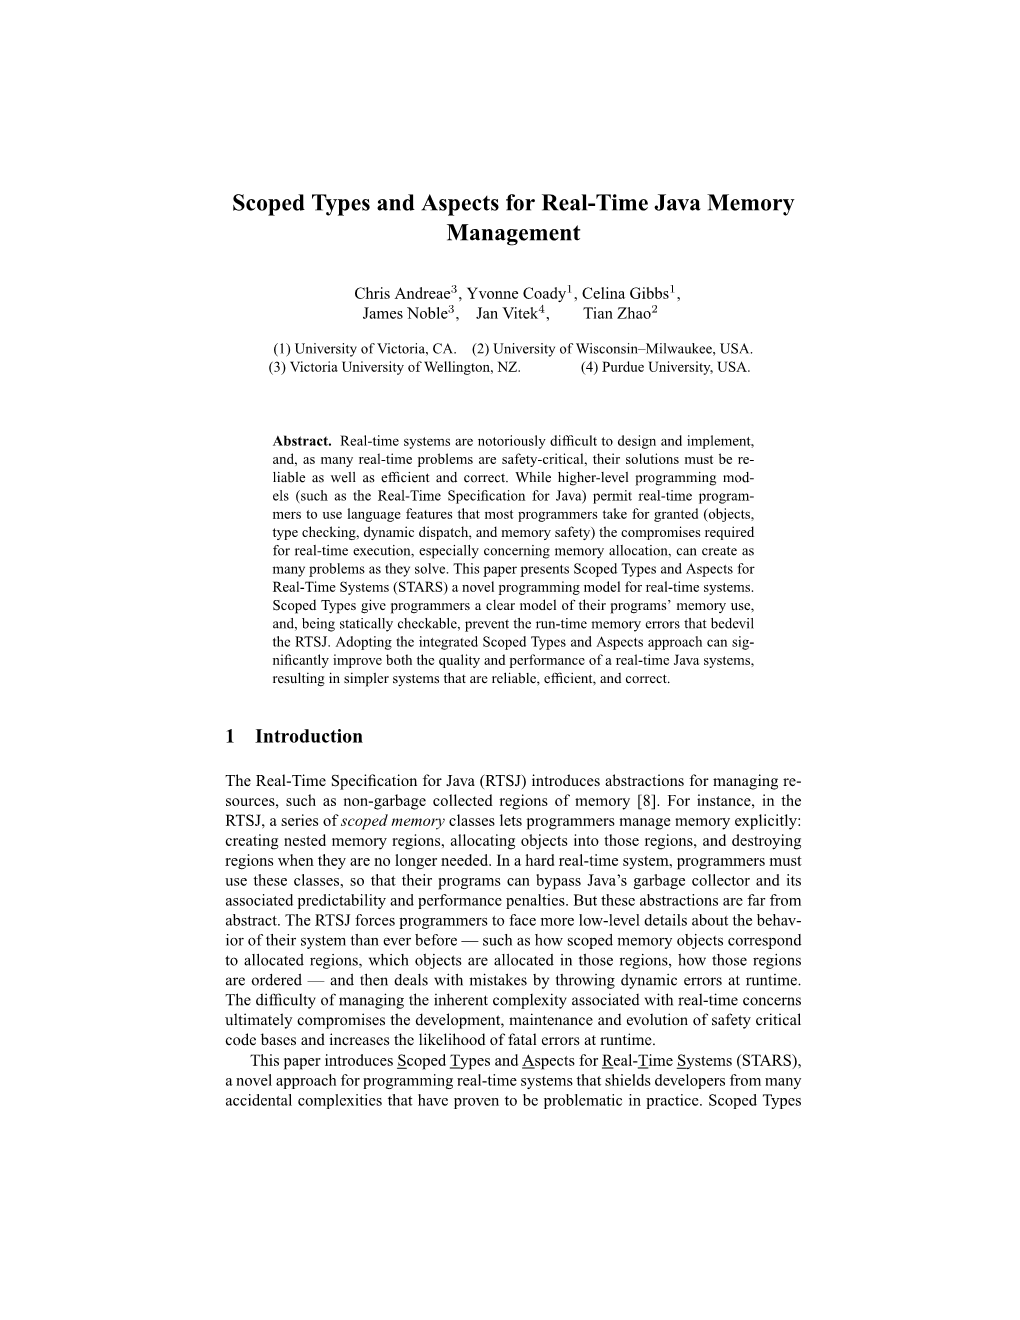 Scoped Types and Aspects for Real-Time Java Memory Management